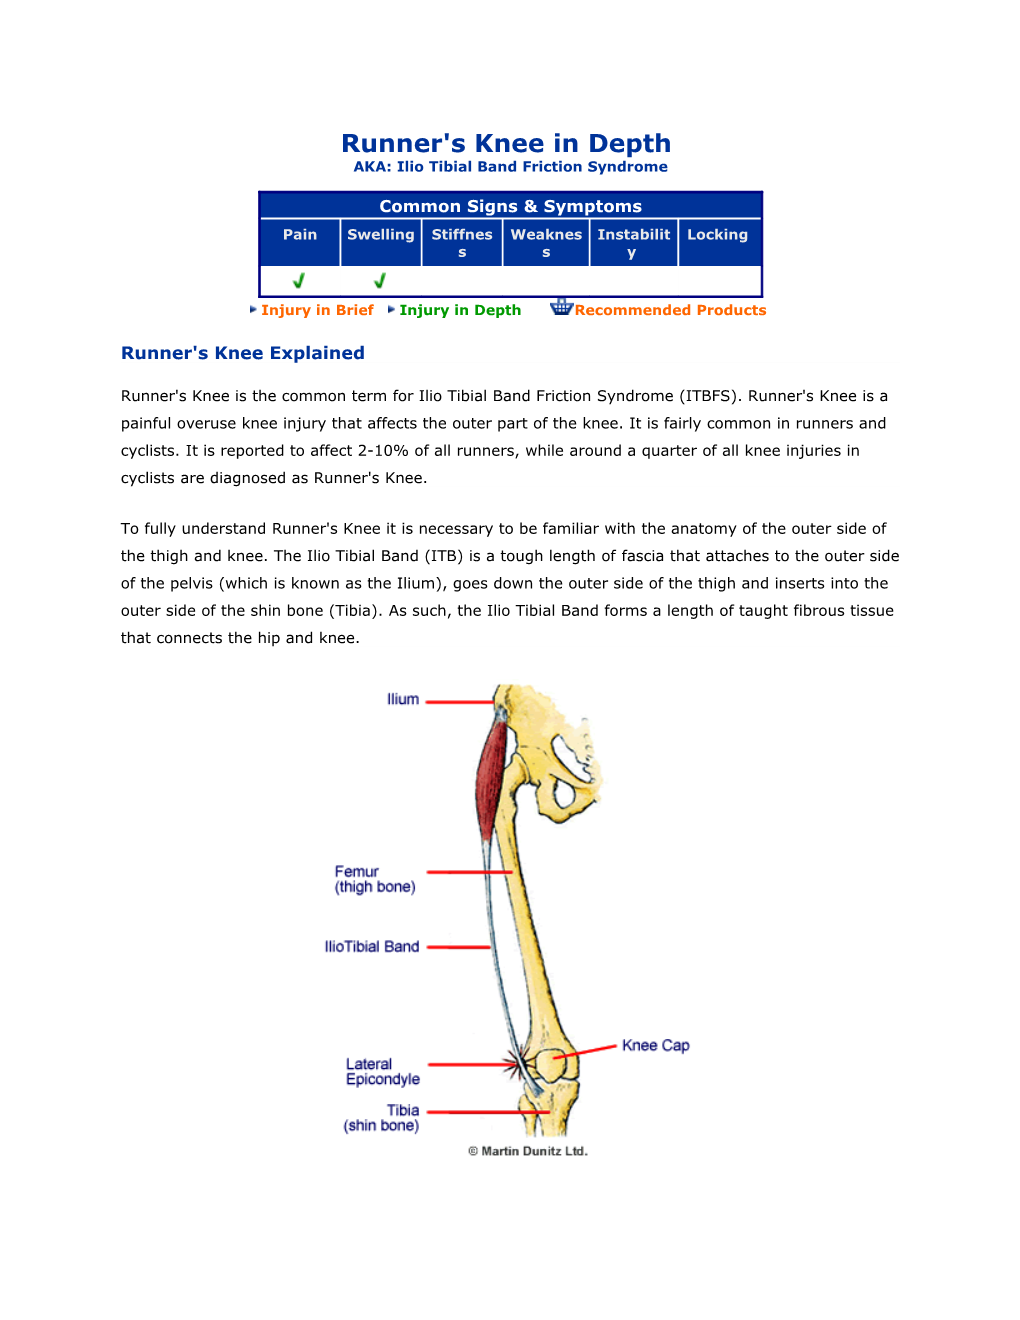 Runner's Knee in Depth AKA: Ilio Tibial Band Friction Syndrome